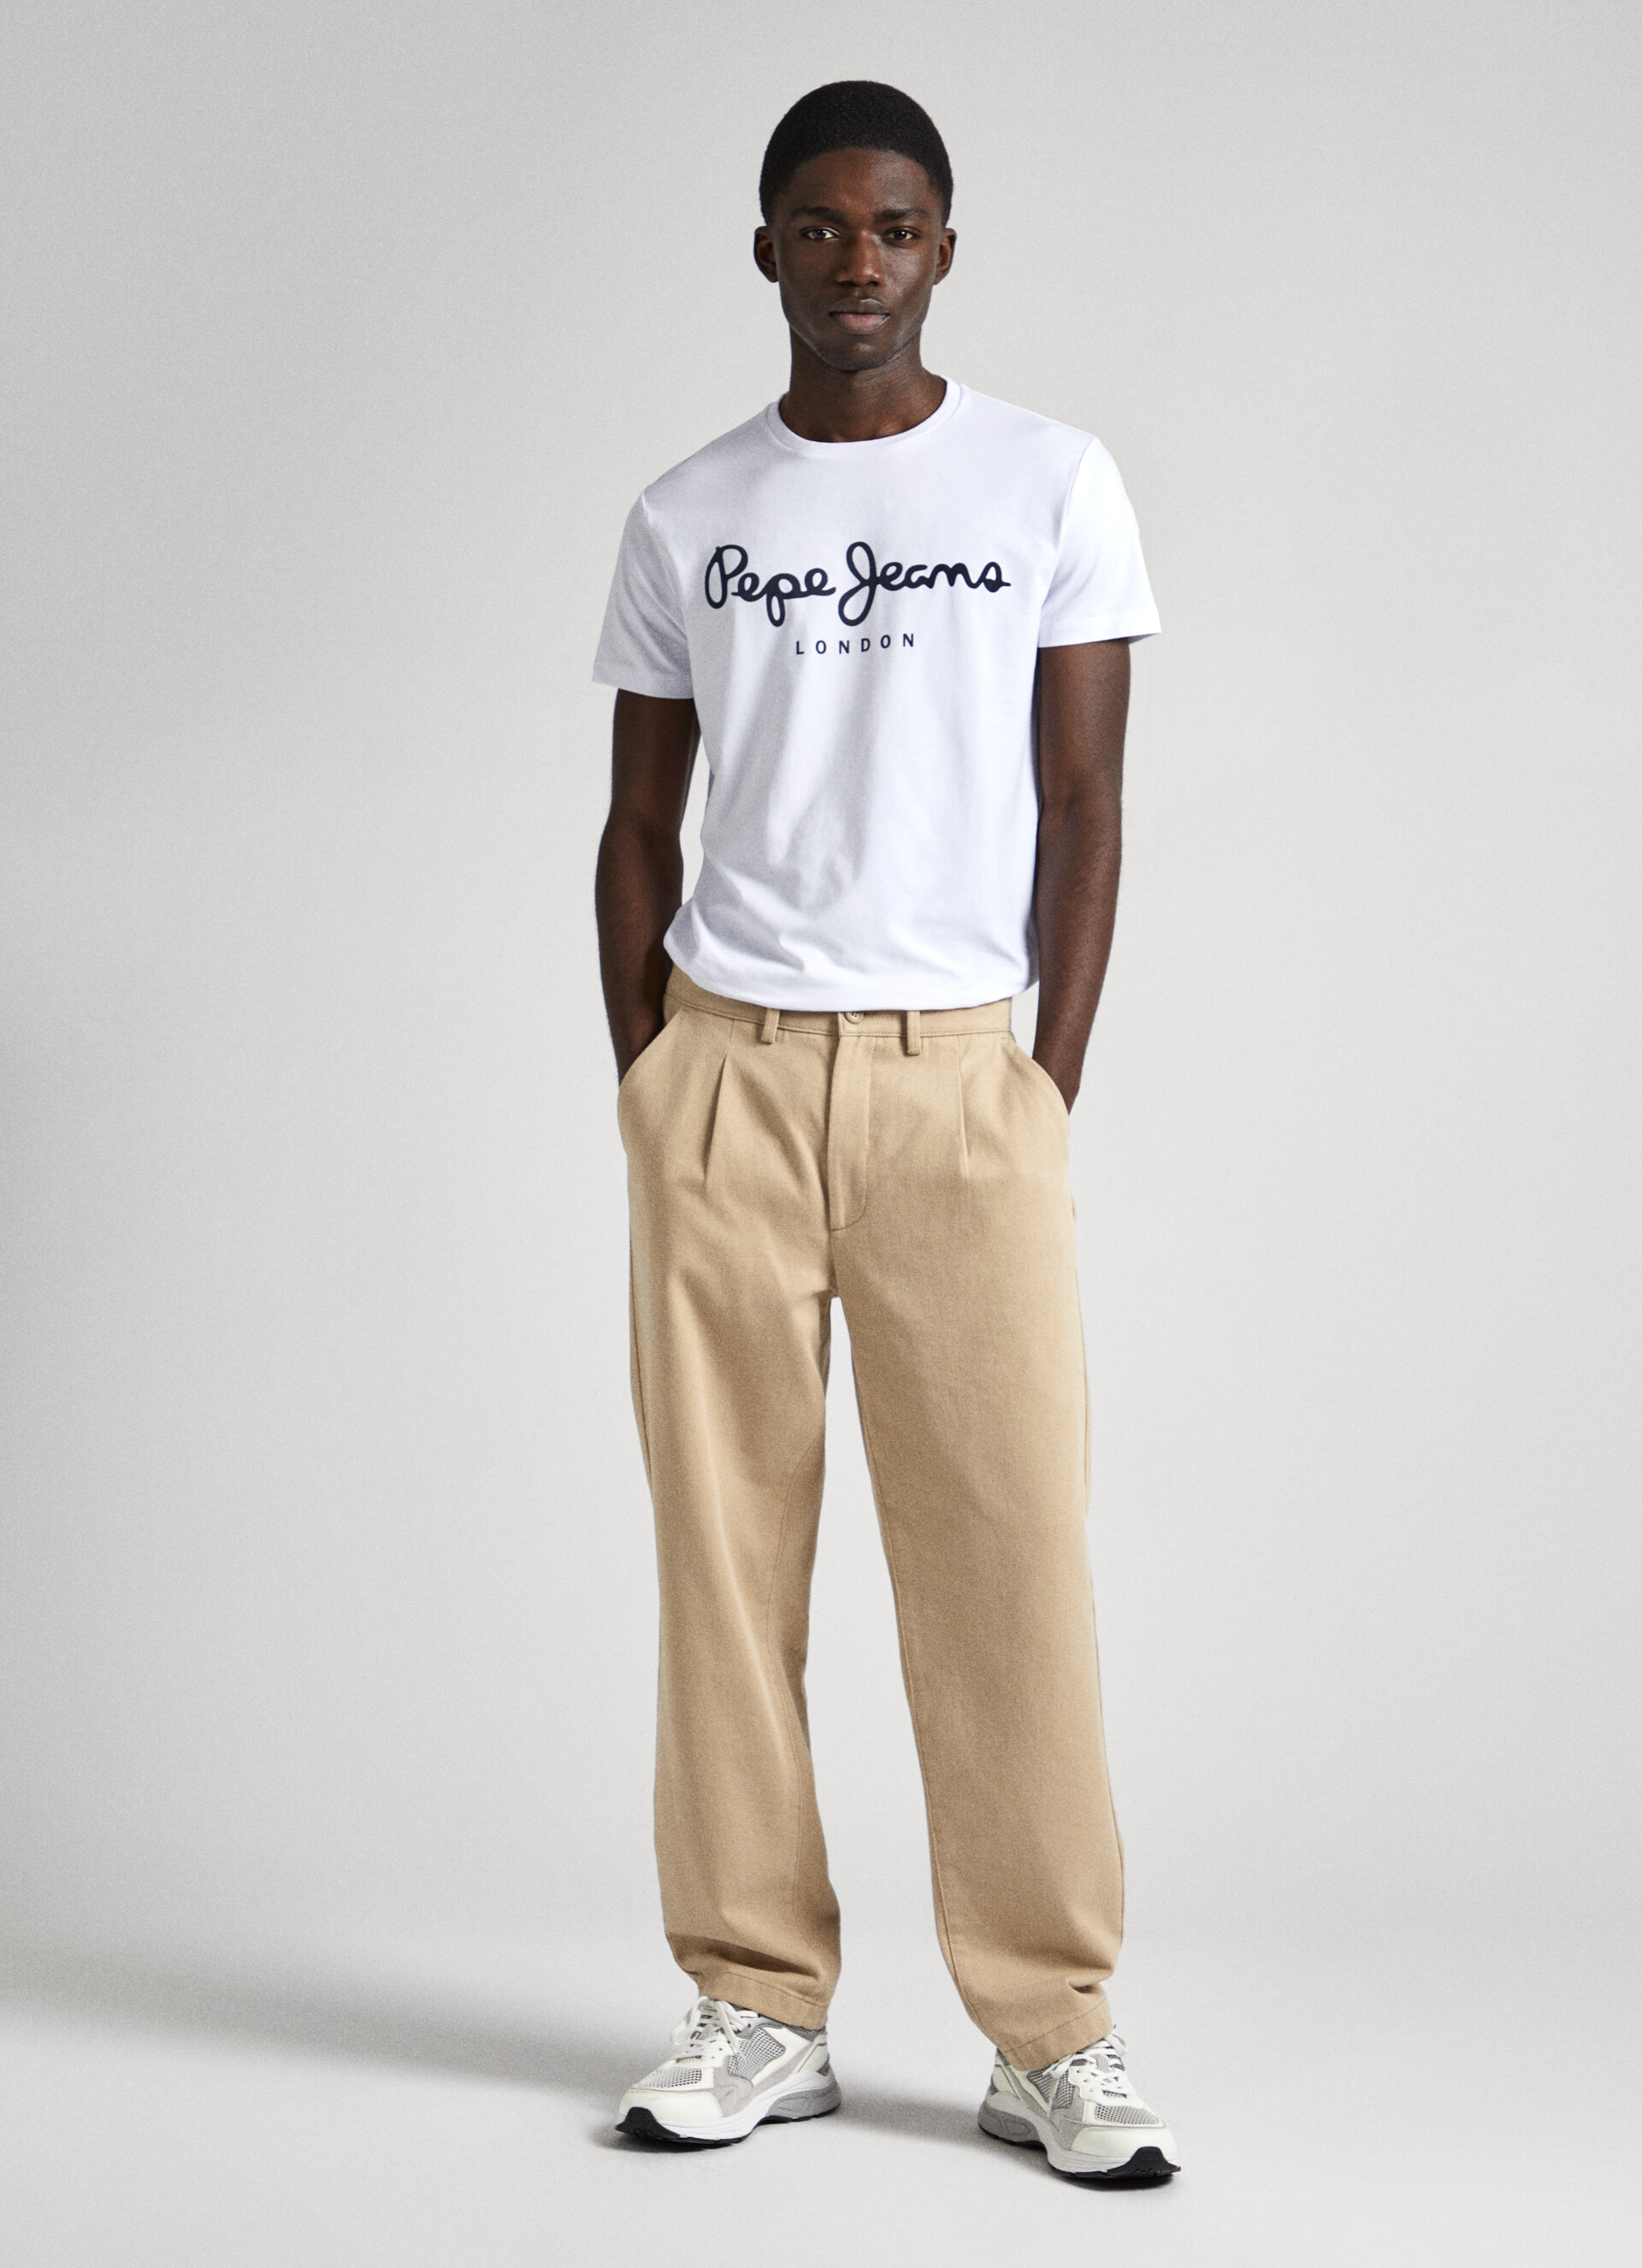 Cotton | Short-Sleeved Jeans T-Shirt Pepe